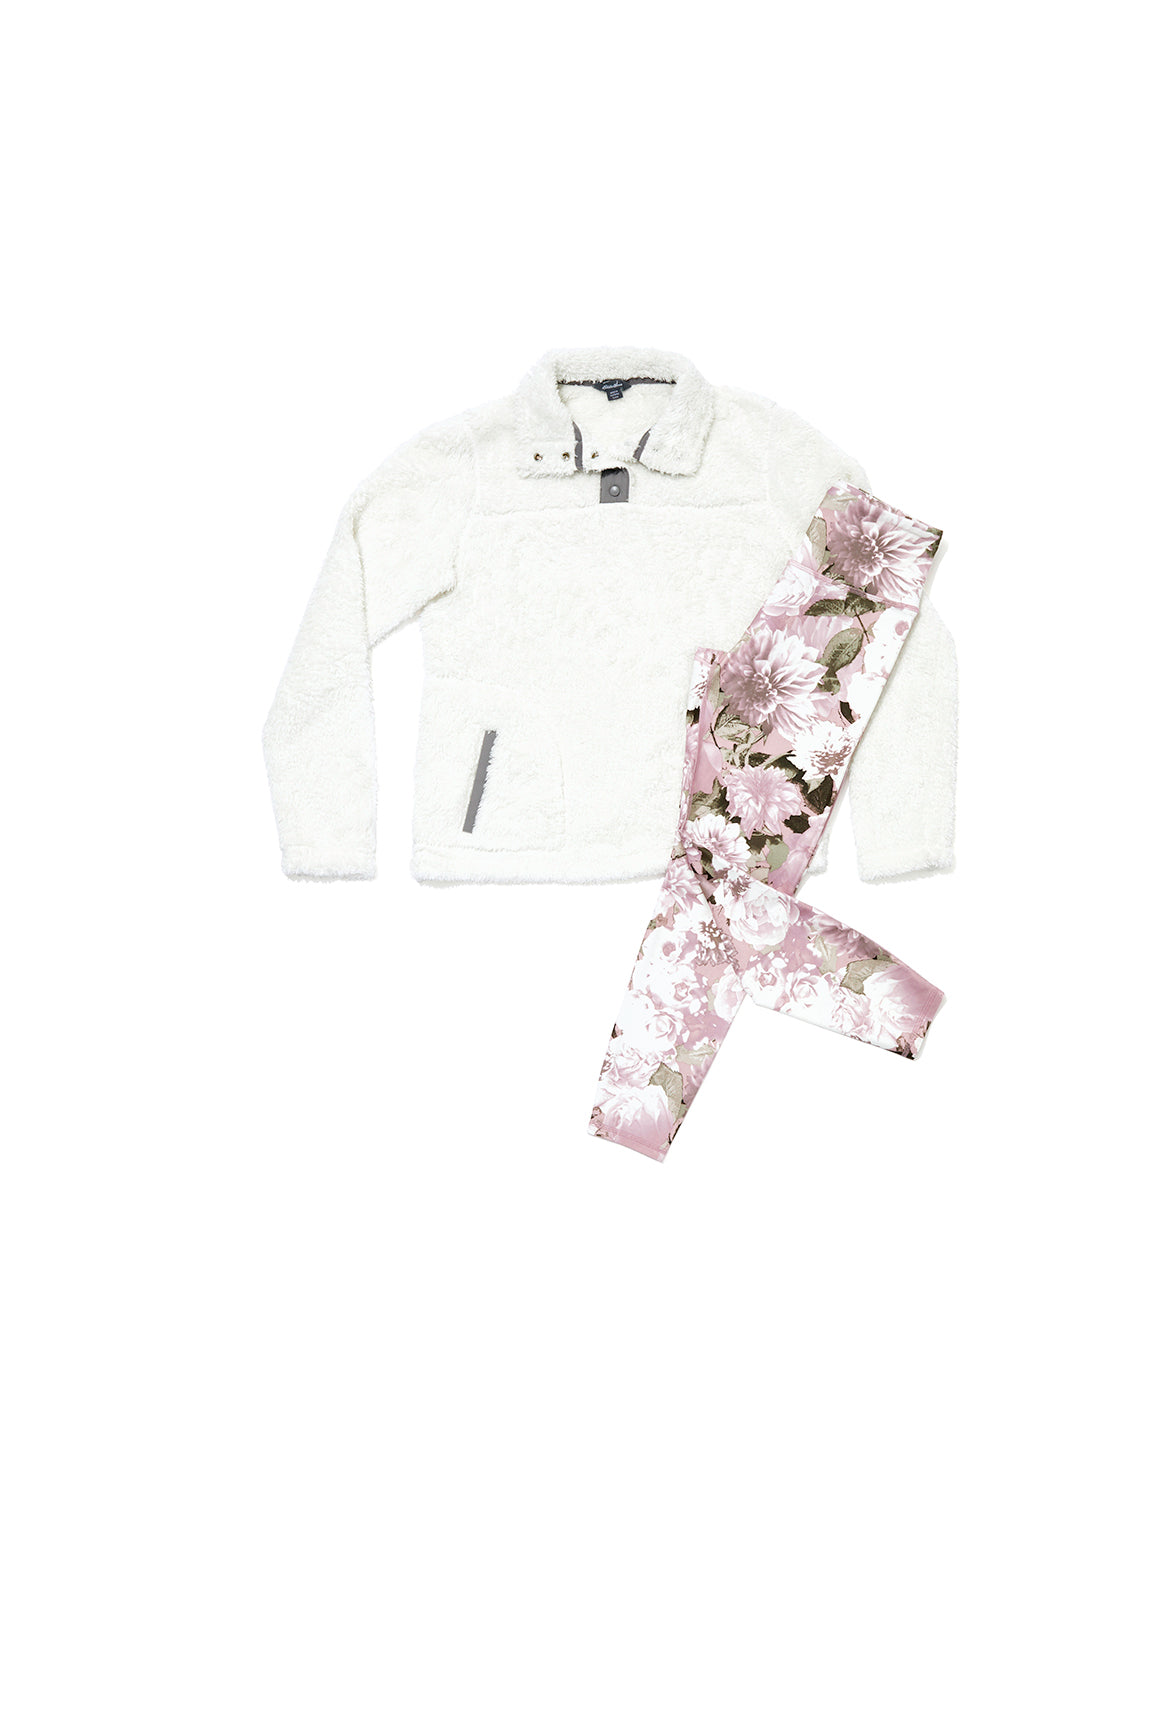 Floral Frost - 2 Items